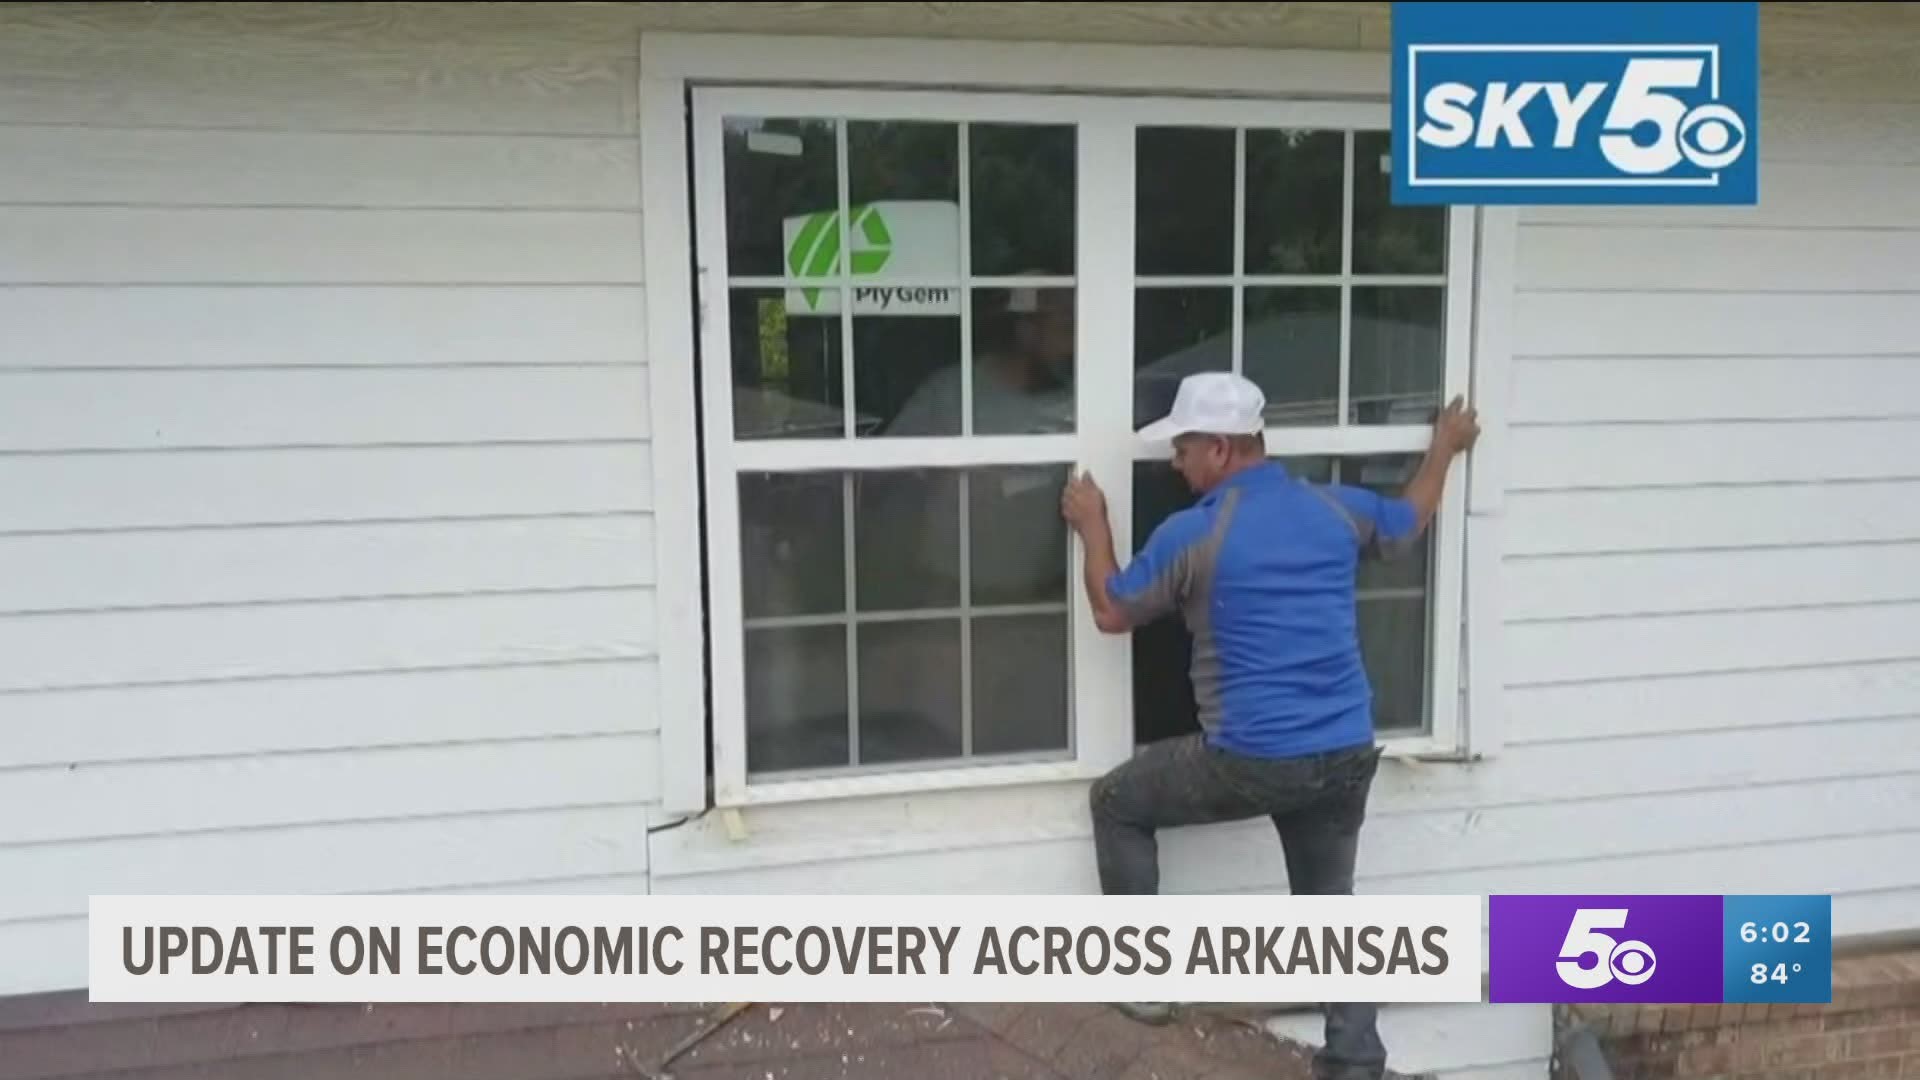 With more people staying at home in Arkansas, a need for home improvement specialists has risen. https://bit.ly/2RdqEXj